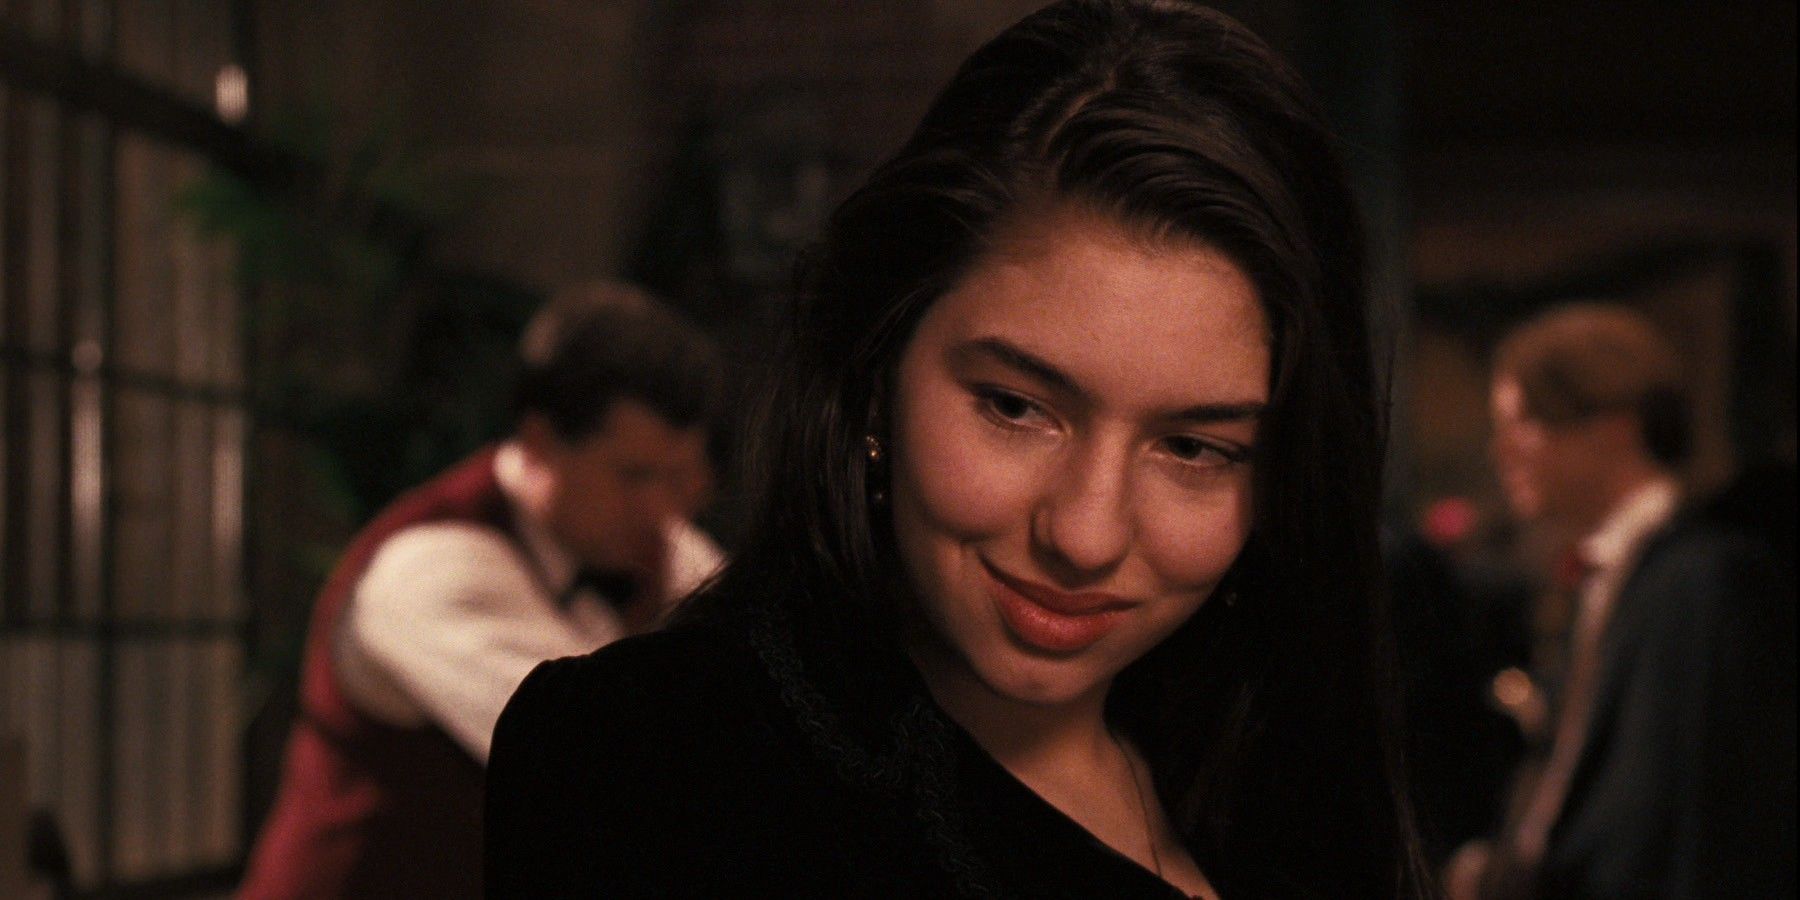 Sofia Coppola grinning as Mary Corleone in The Godfather Part III.